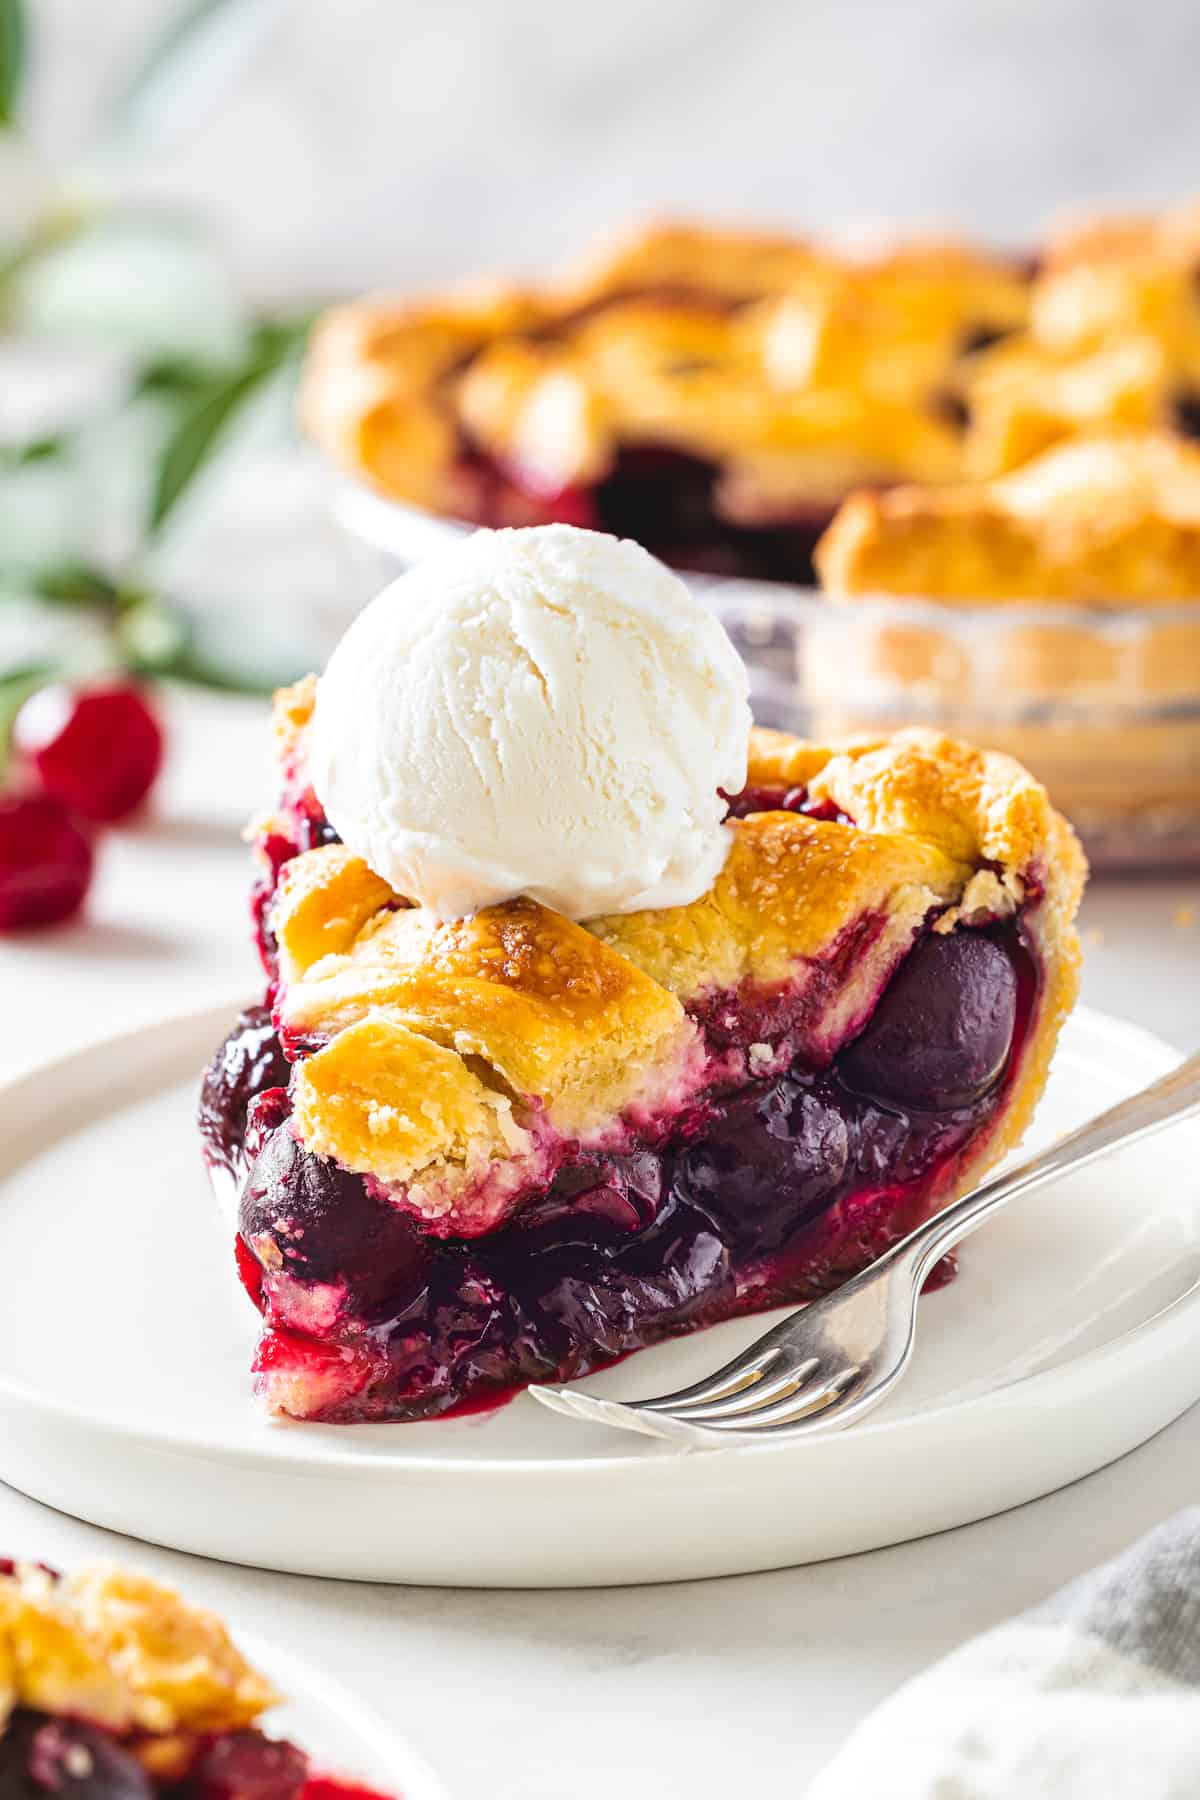 A slice of cherry pie topped with a scoop of ice cream